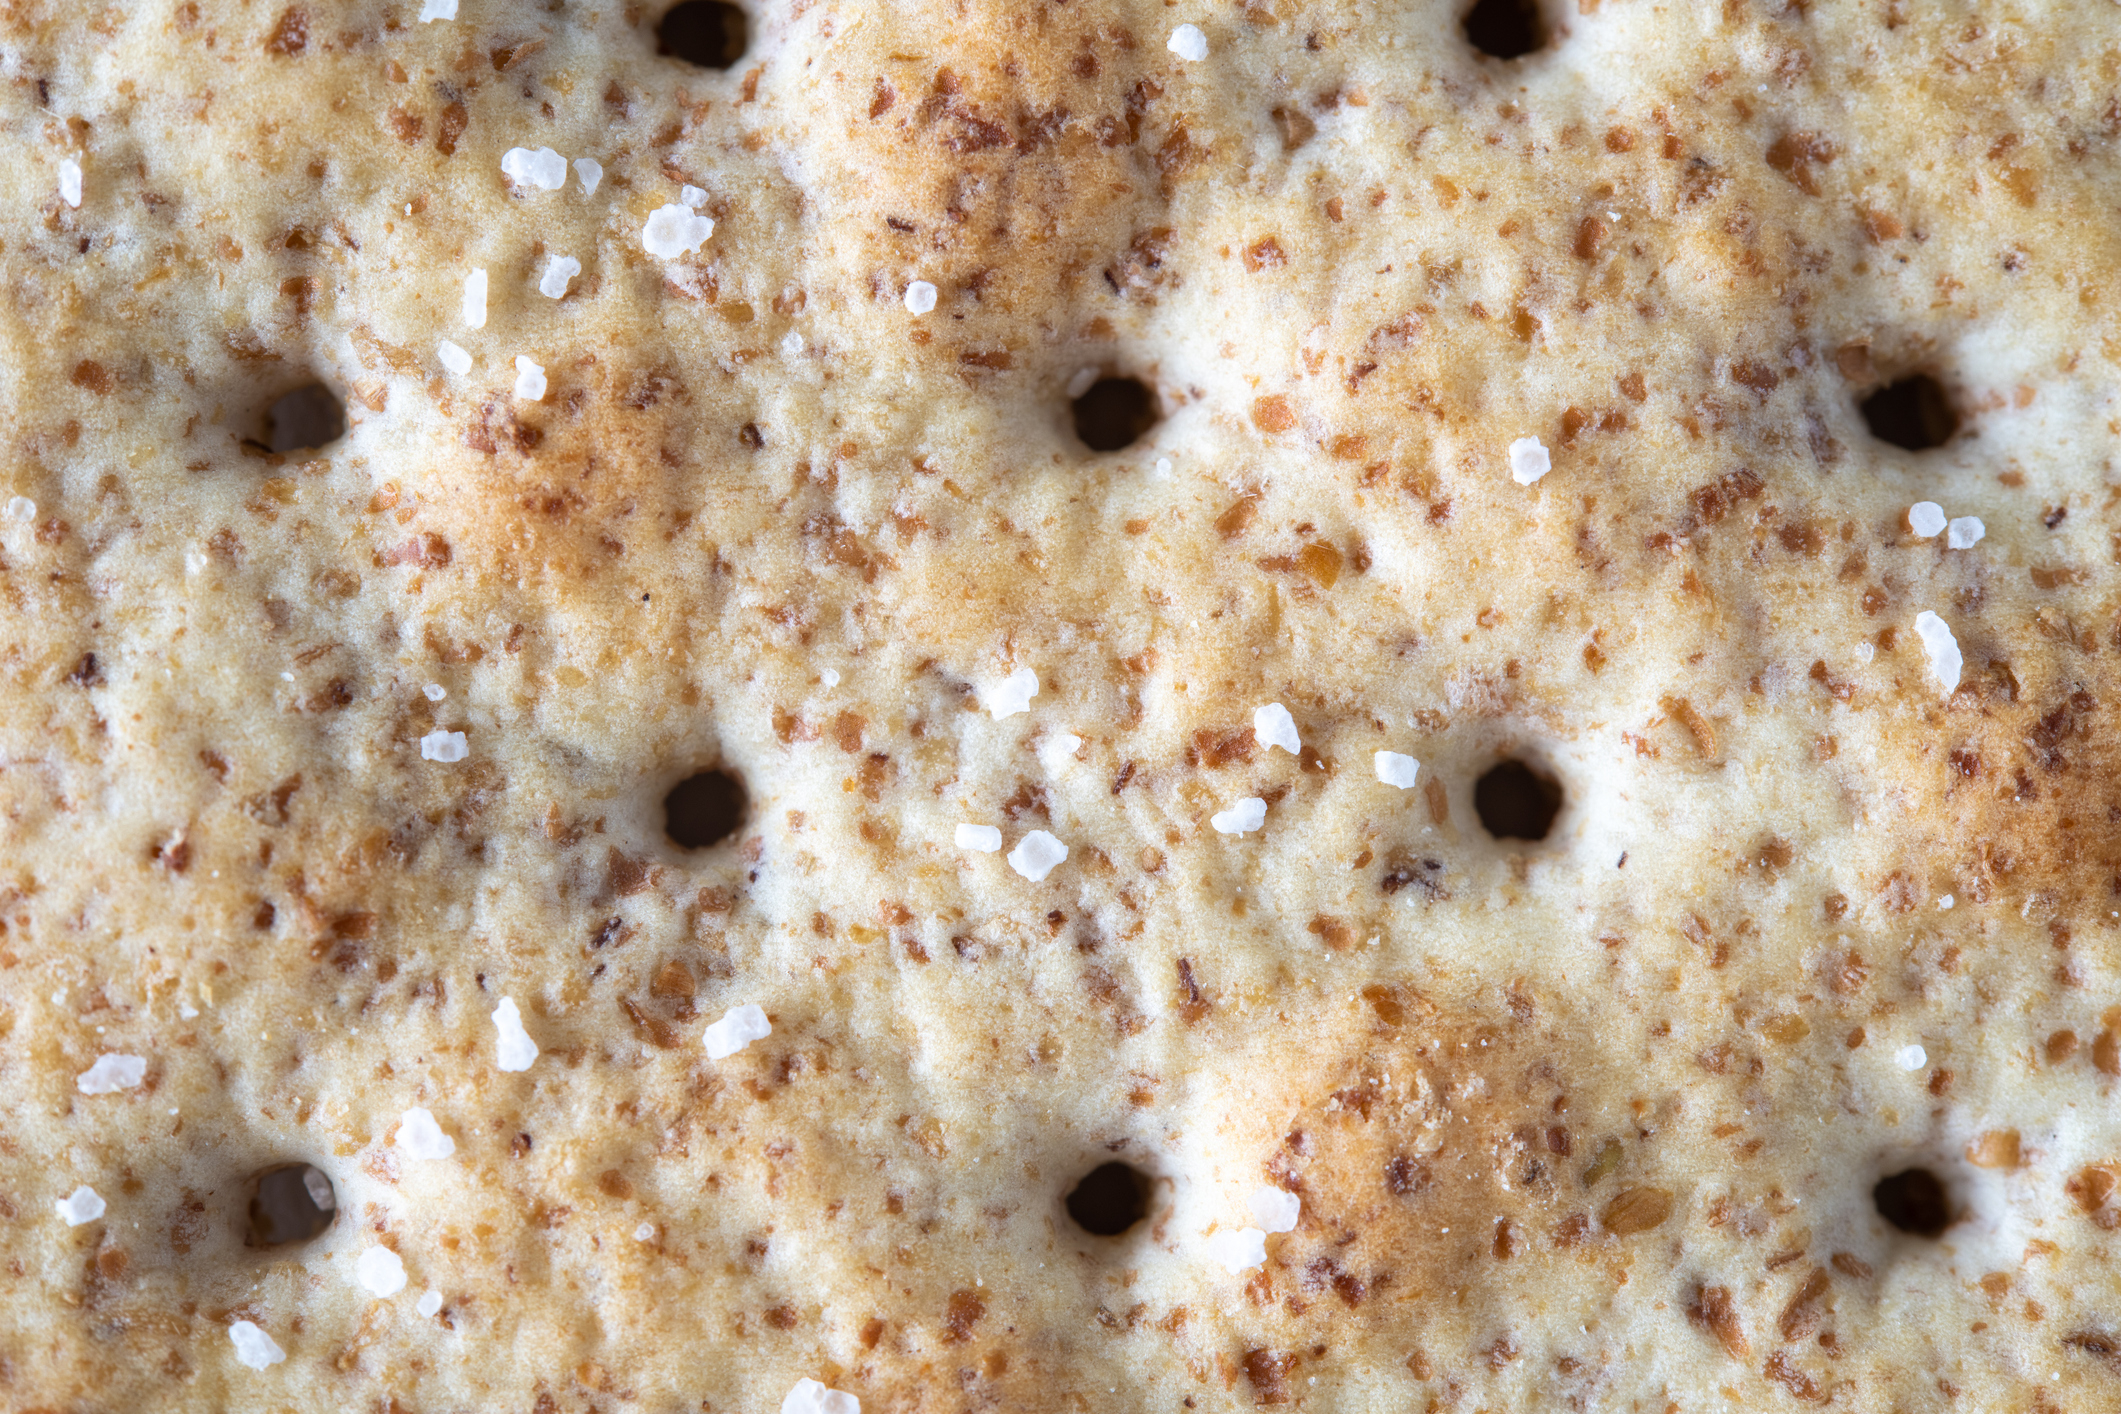 Close-up of a salted matzo cracker, commonly eaten during Passover